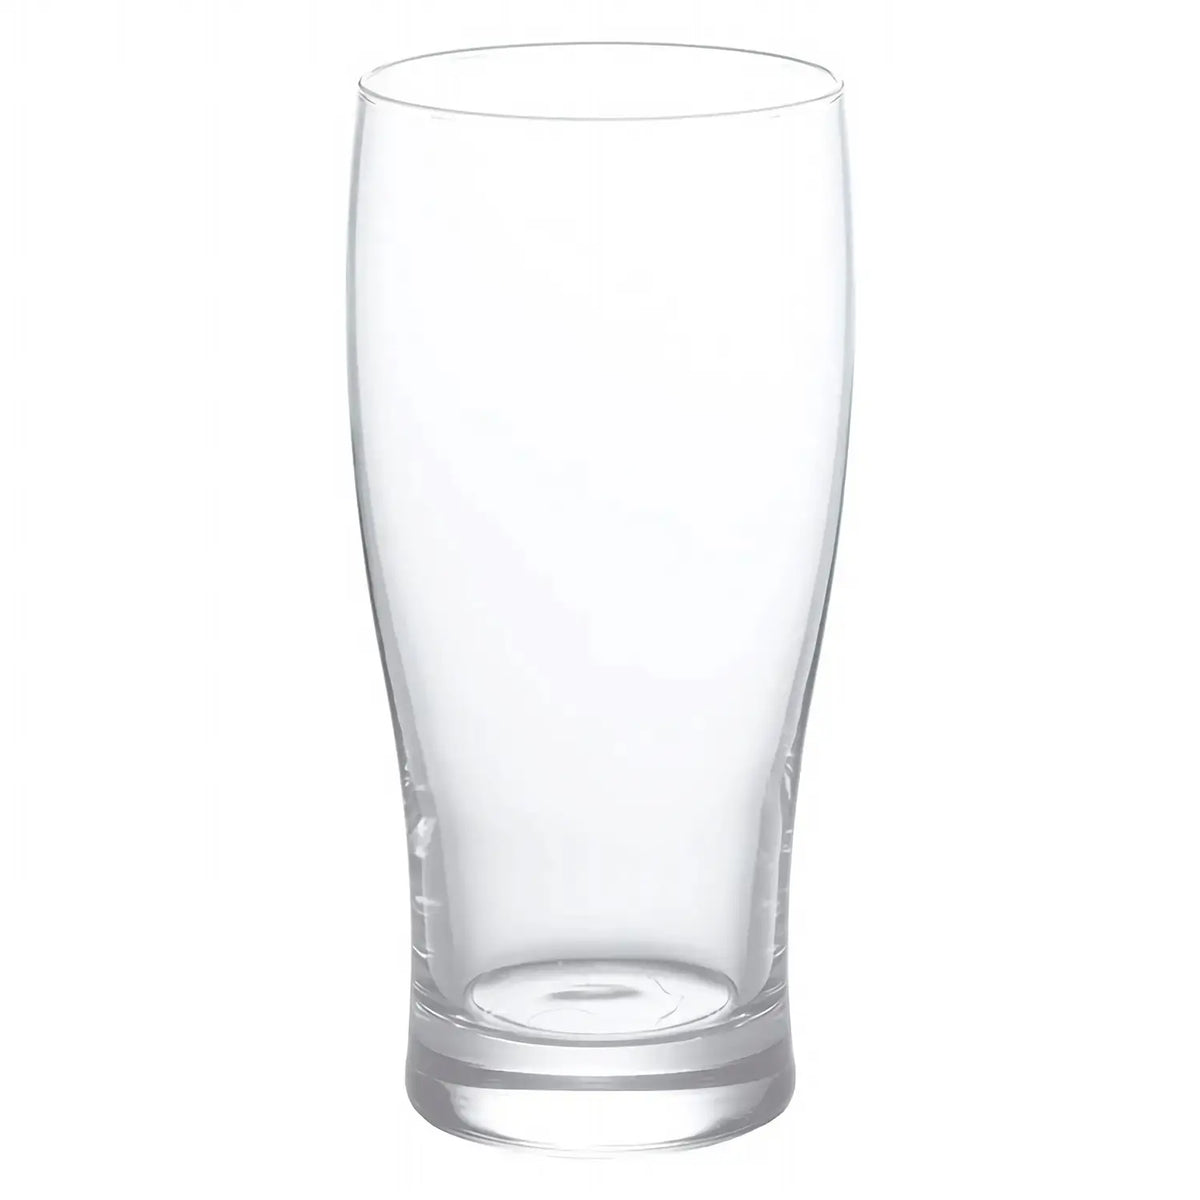 ADERIA Soda-Lime Glass Beer Glass Set of 3